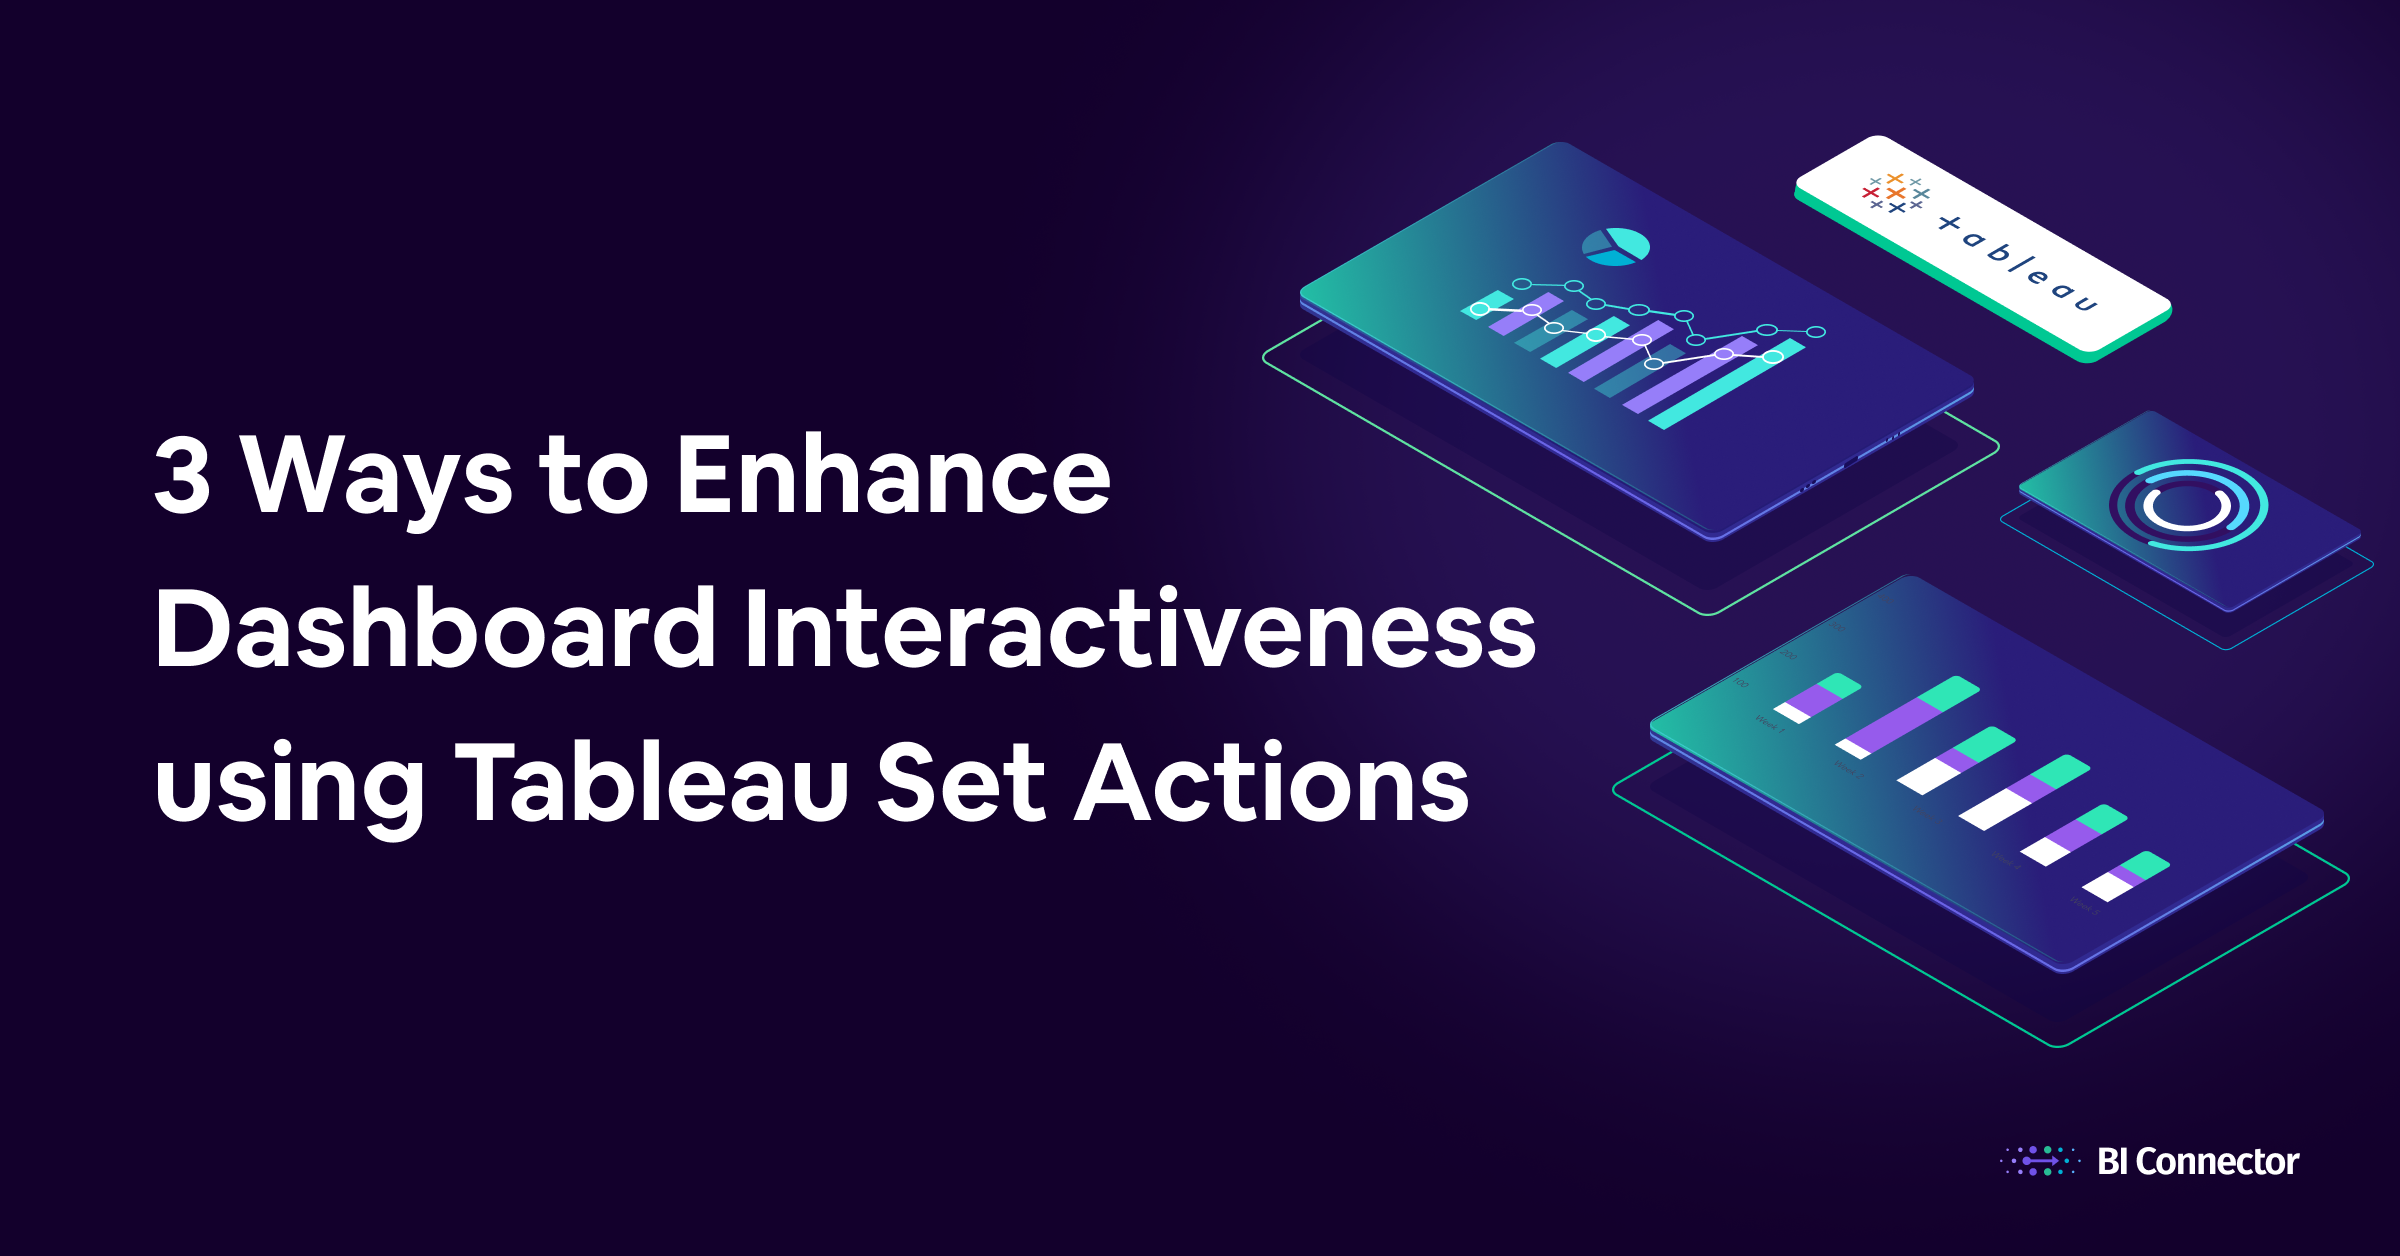 3 Ways to Enhance Dashboard Interactiveness using Tableau Set Actions